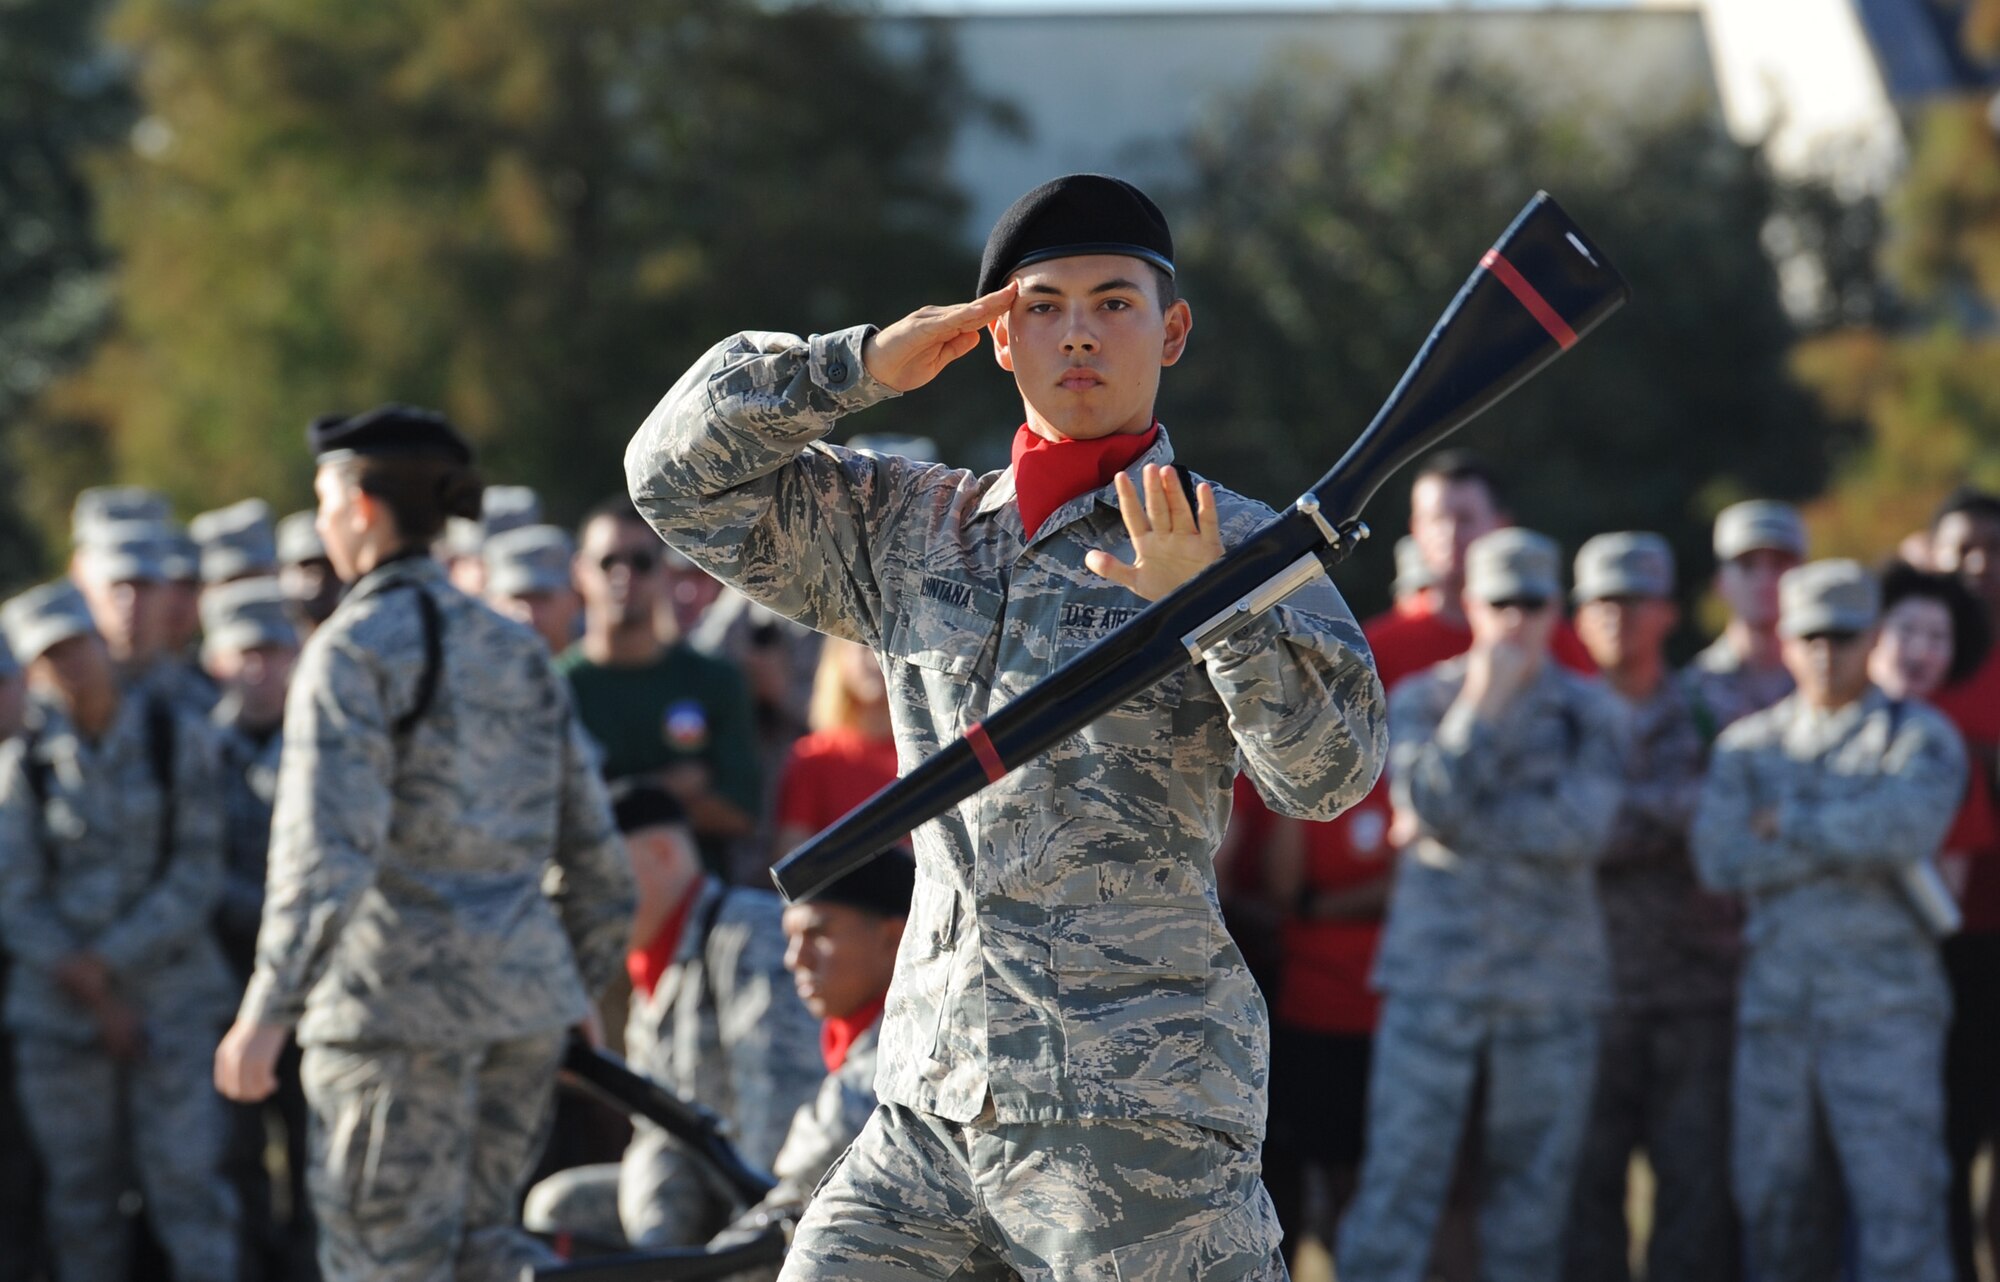 Airman Basic Clayton Quintana, 336th Training Squadron freestyle drill team member, spins a rifle during the 81st Training Group drill down at the Levitow Training Support Facility drill pad Nov. 4, 2016, on Keesler Air Force Base, Miss. The quarterly drill down featured an open ranks inspection, regulation drill routine and freestyle drill routine categories. The 81st TRG’s four non-prior service training squadrons competed in the competition, with the 334th TRS “Gators” taking home the overall first place. (U.S. Air Force photo by Kemberly Groue/Released)